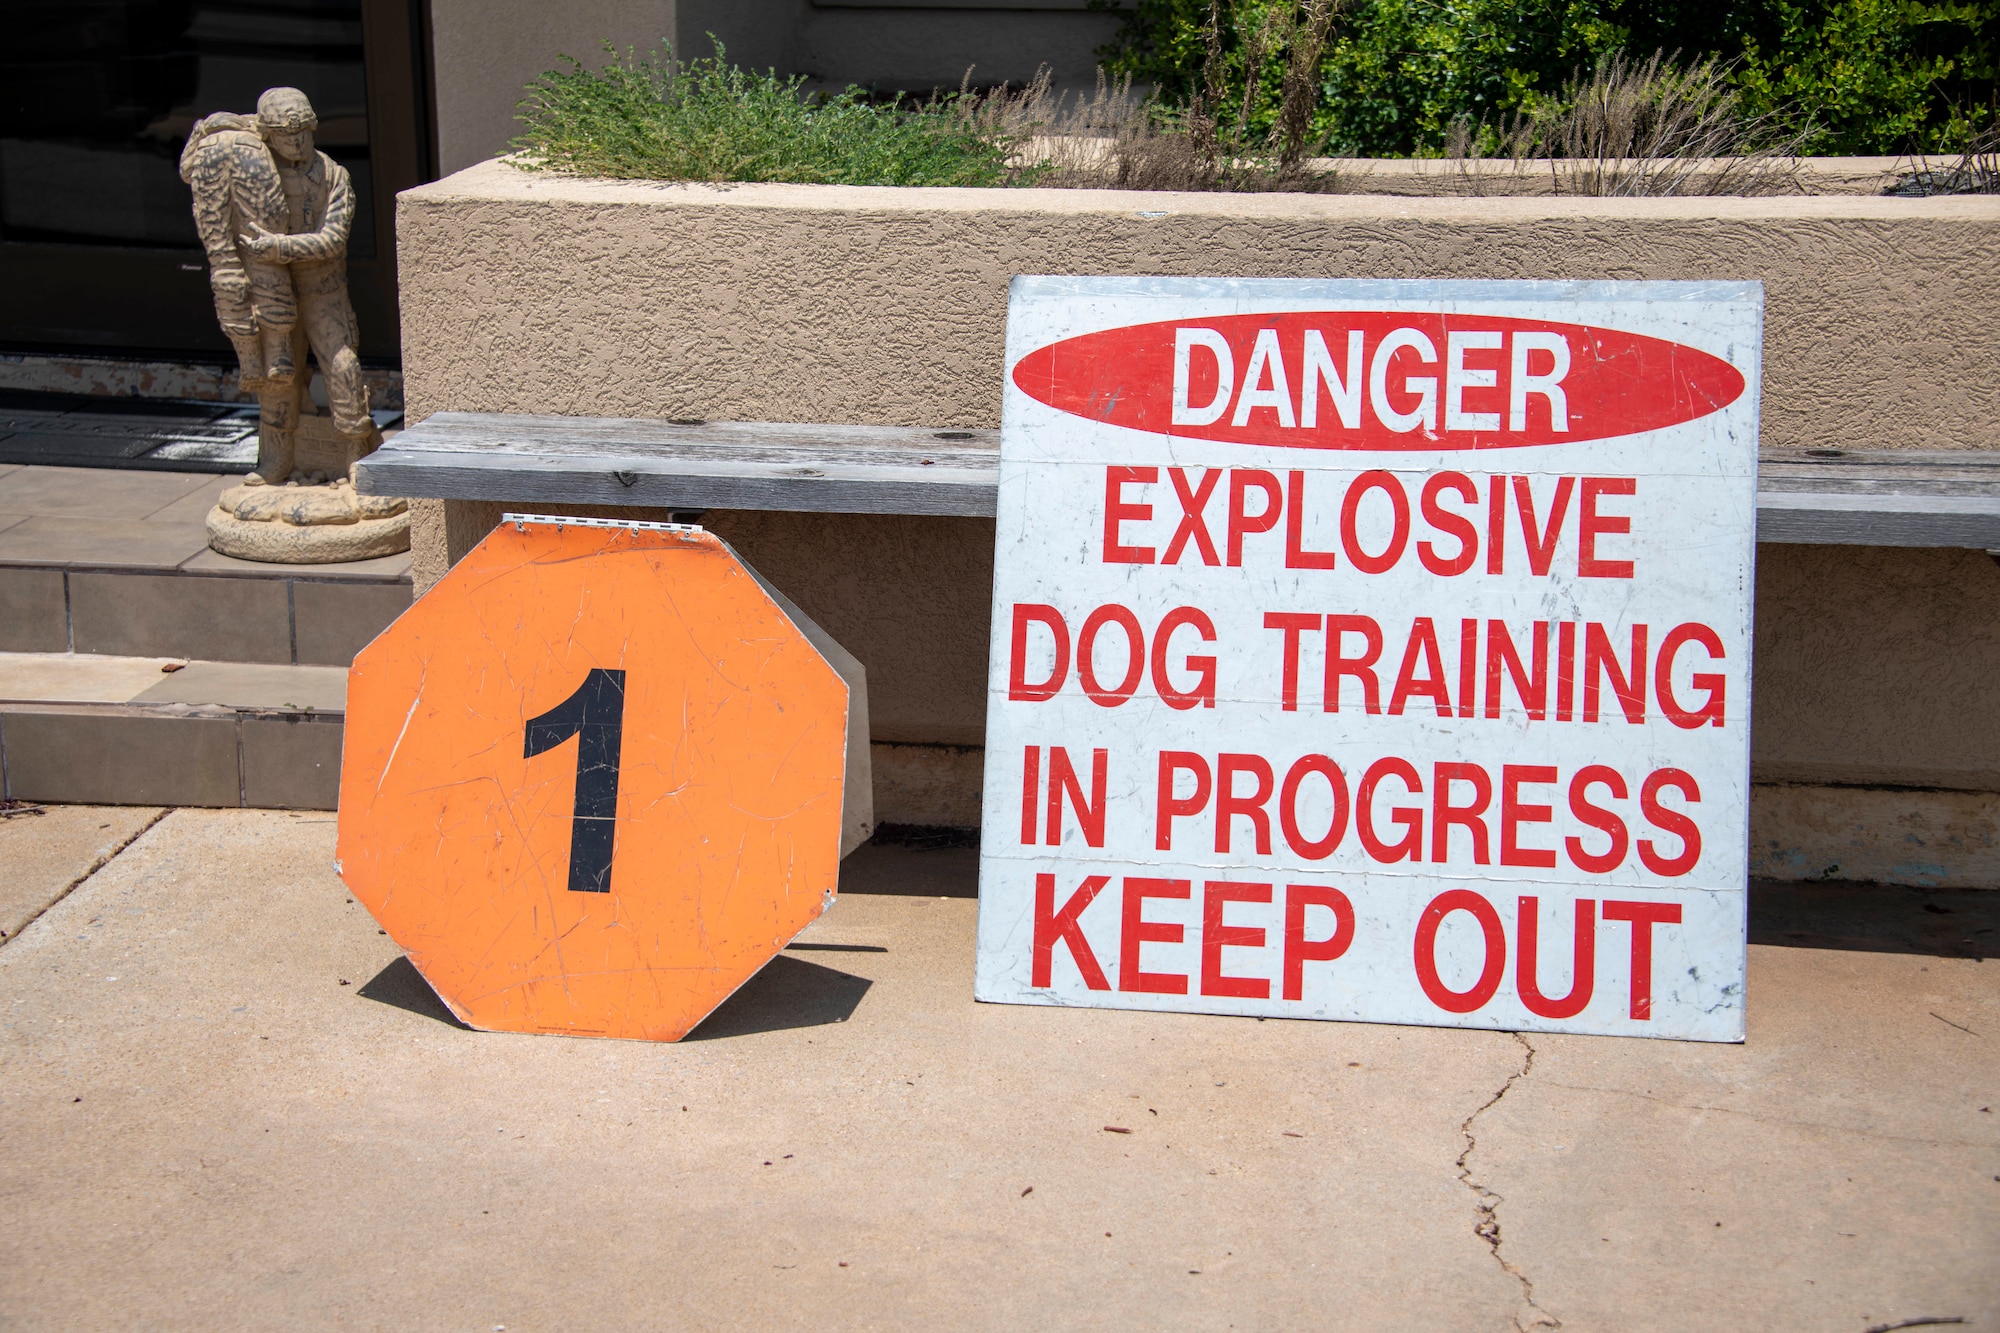 Signs are displayed to warn personnel about Military Working Dog (MWD) training using explosives at Altus Air Force Base, Oklahoma, July 28, 2021. The MWDs on base are trained on explosive or drug detection as well as the ability to take down a fleeing assailant. (U.S. Air Force photo by Staff Sgt. Cody Dowell)